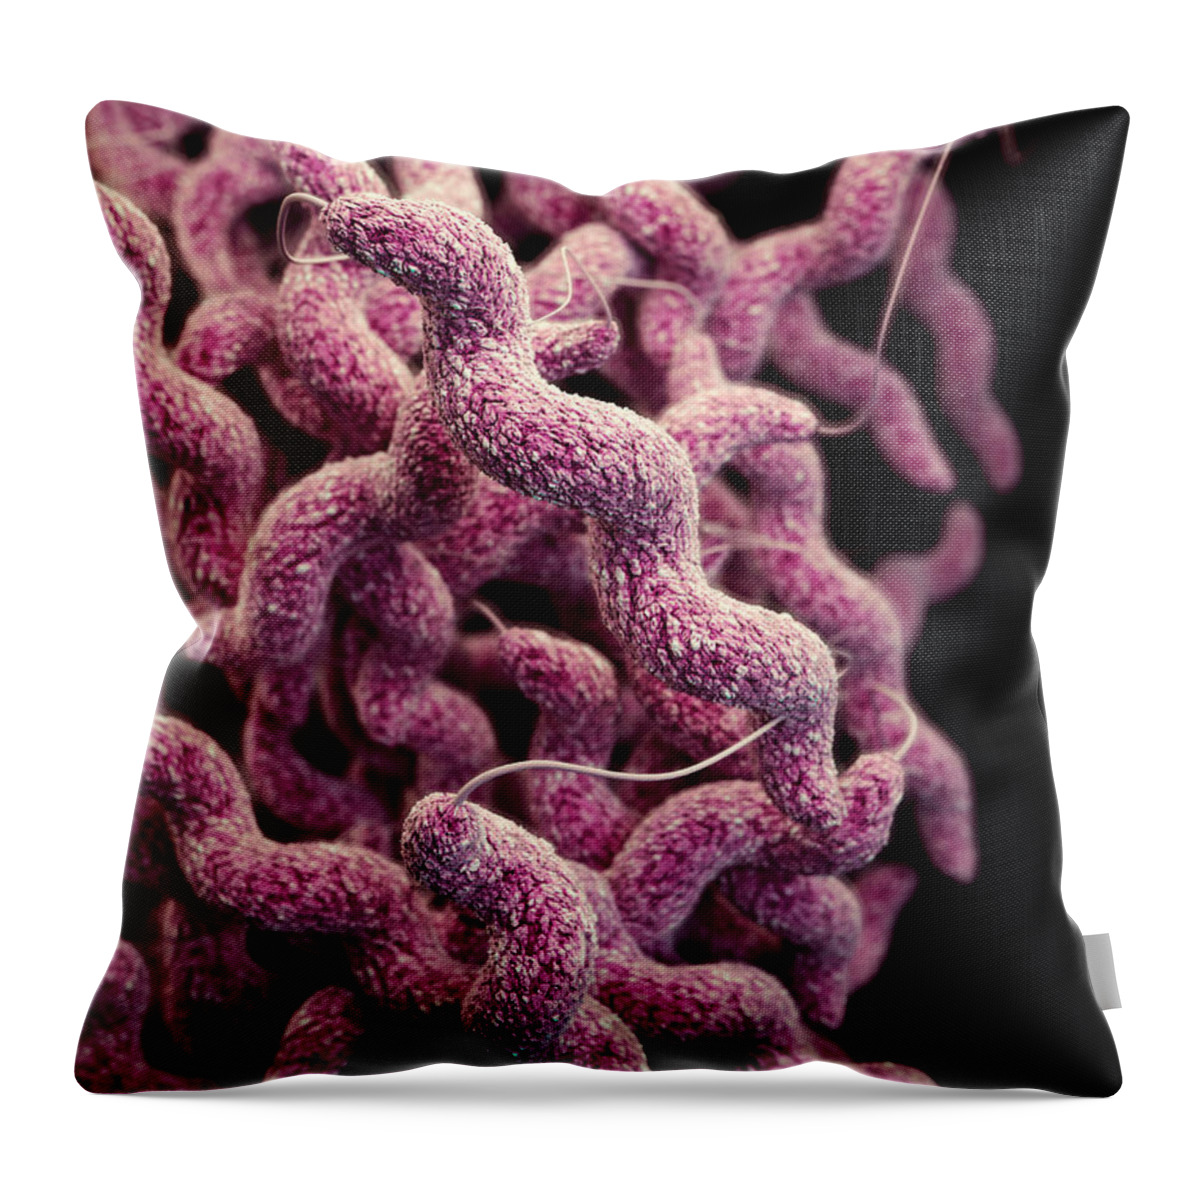 Drug Resistant Throw Pillow featuring the photograph Drug-resistant Campylobacter by Science Source